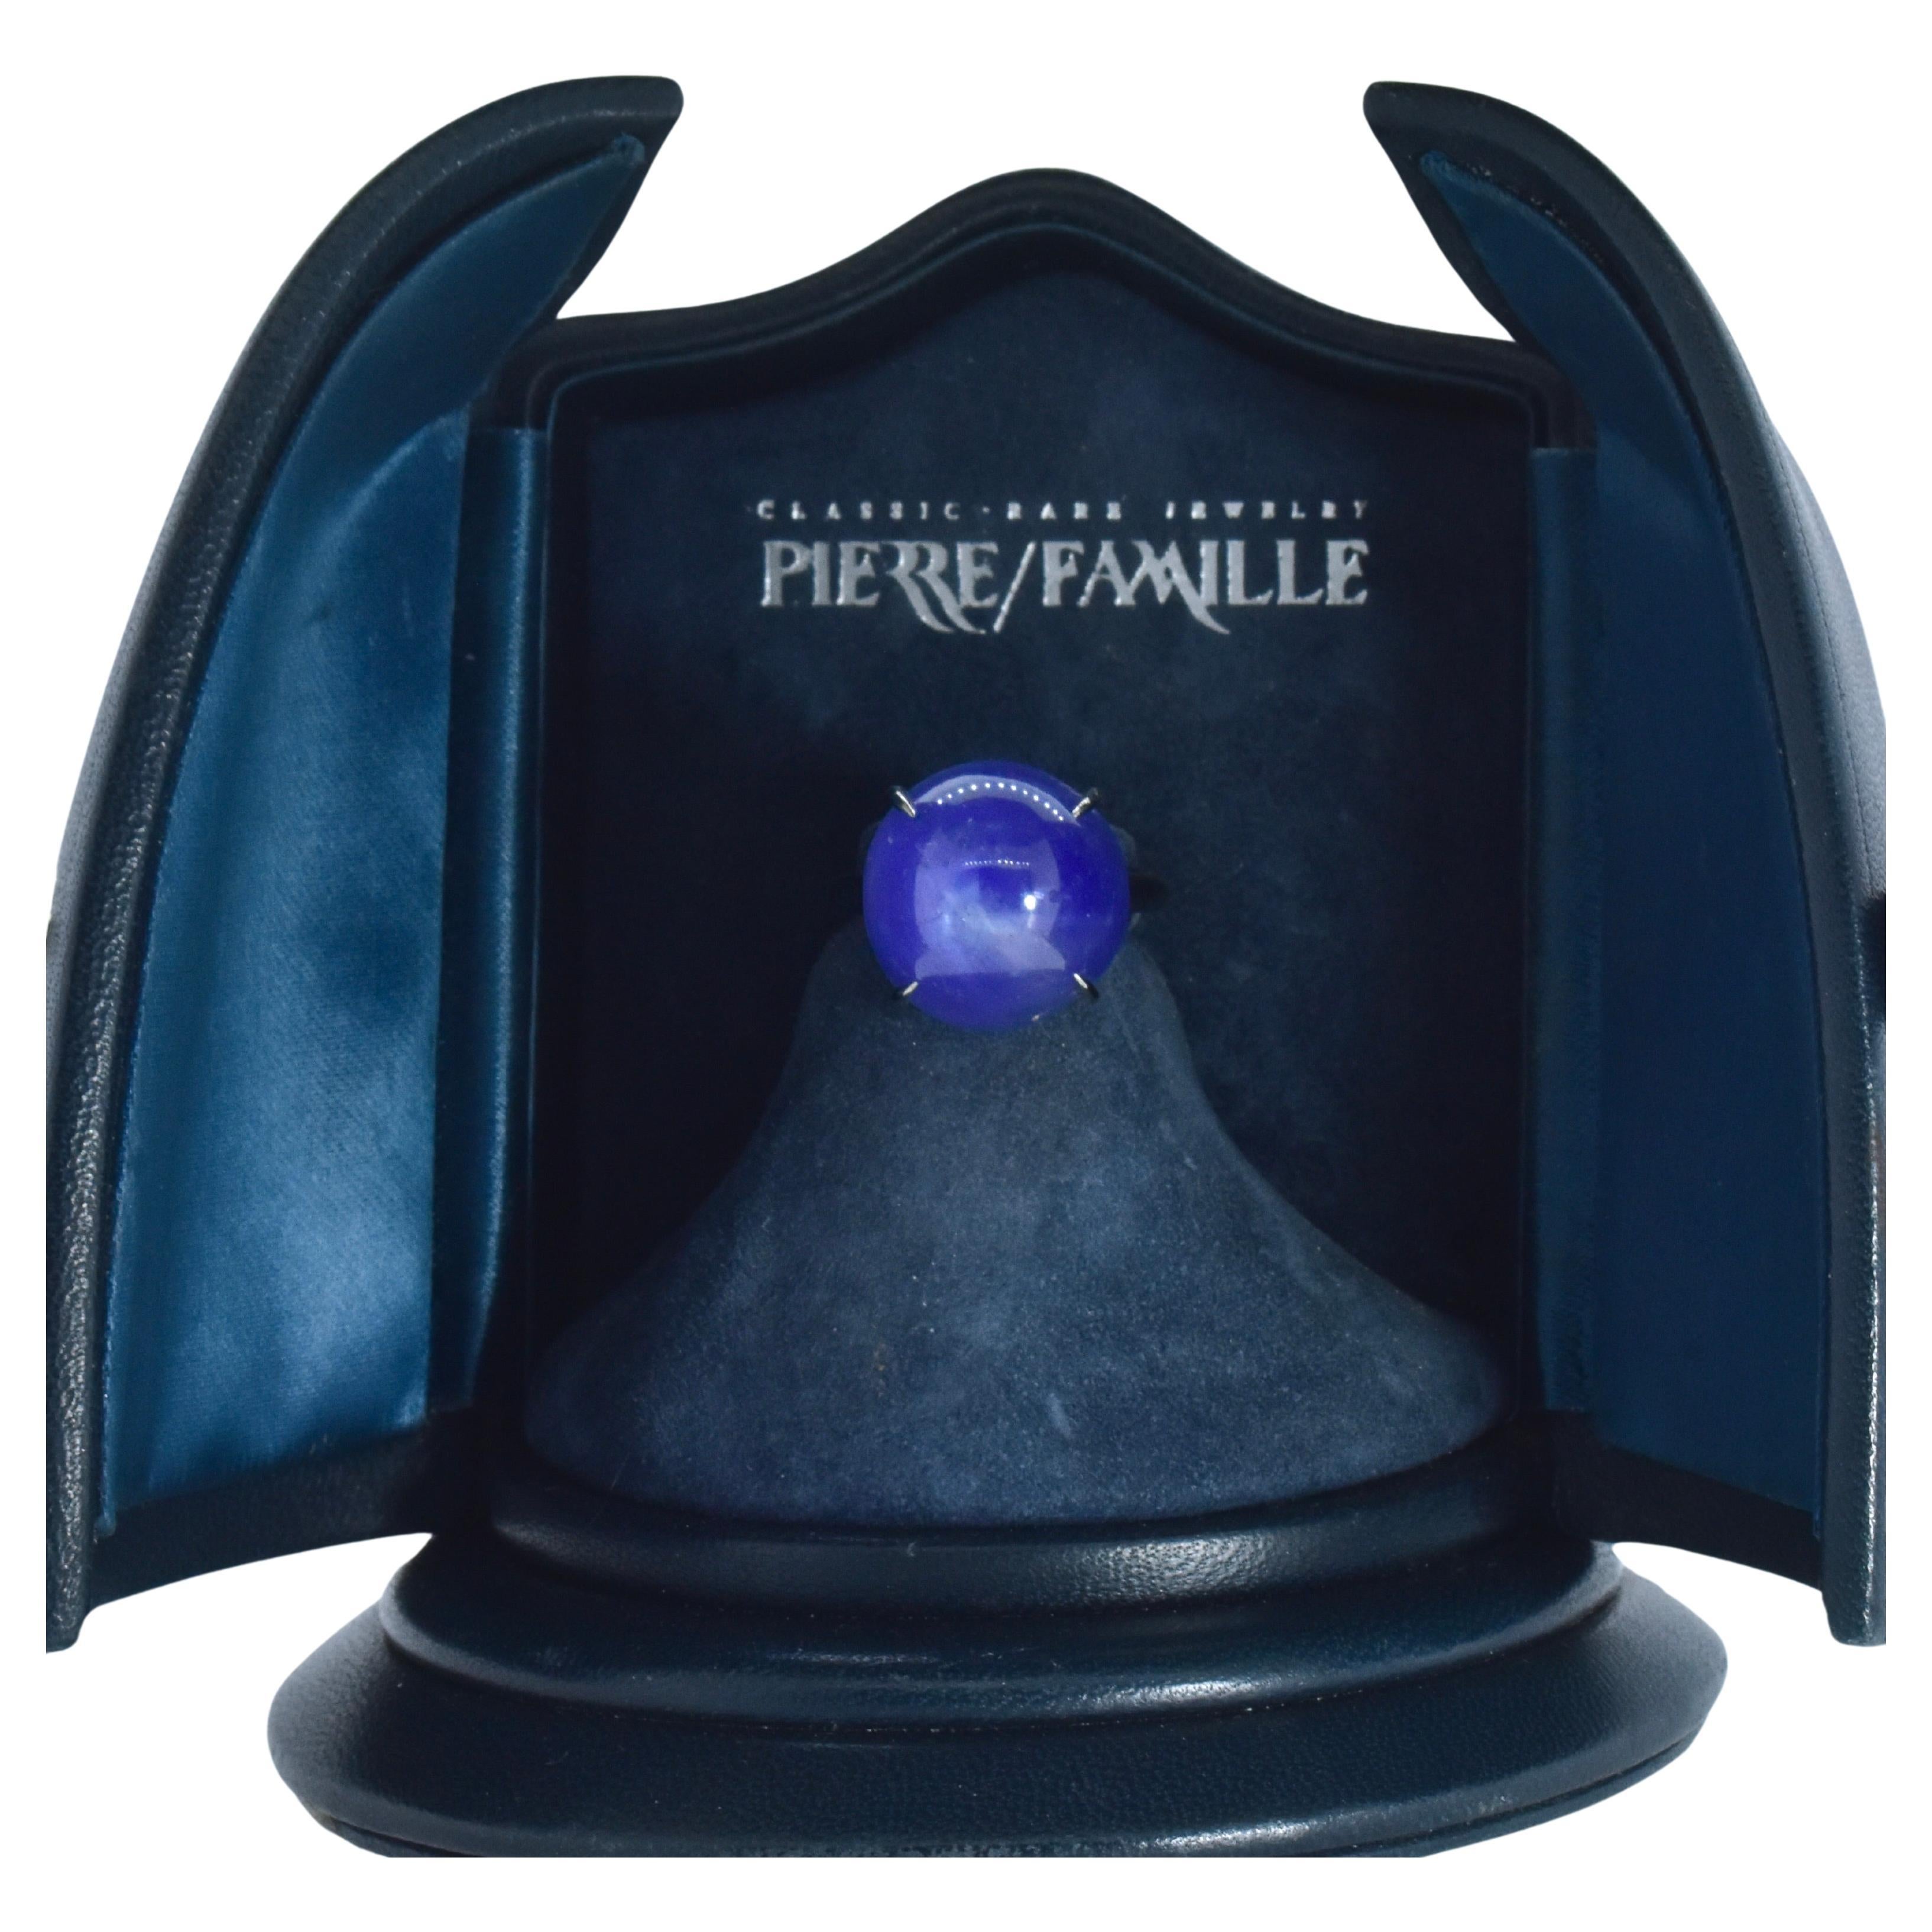 Star Sapphire, unheated, and Platinum Ring hand crafted by Pierre/Famille.   This cabochon cut  star sapphire weighs 32 cts., and is a pleasing medium blue color with a hint of violet. The handmade platinum mounting has a high polish, is simple and